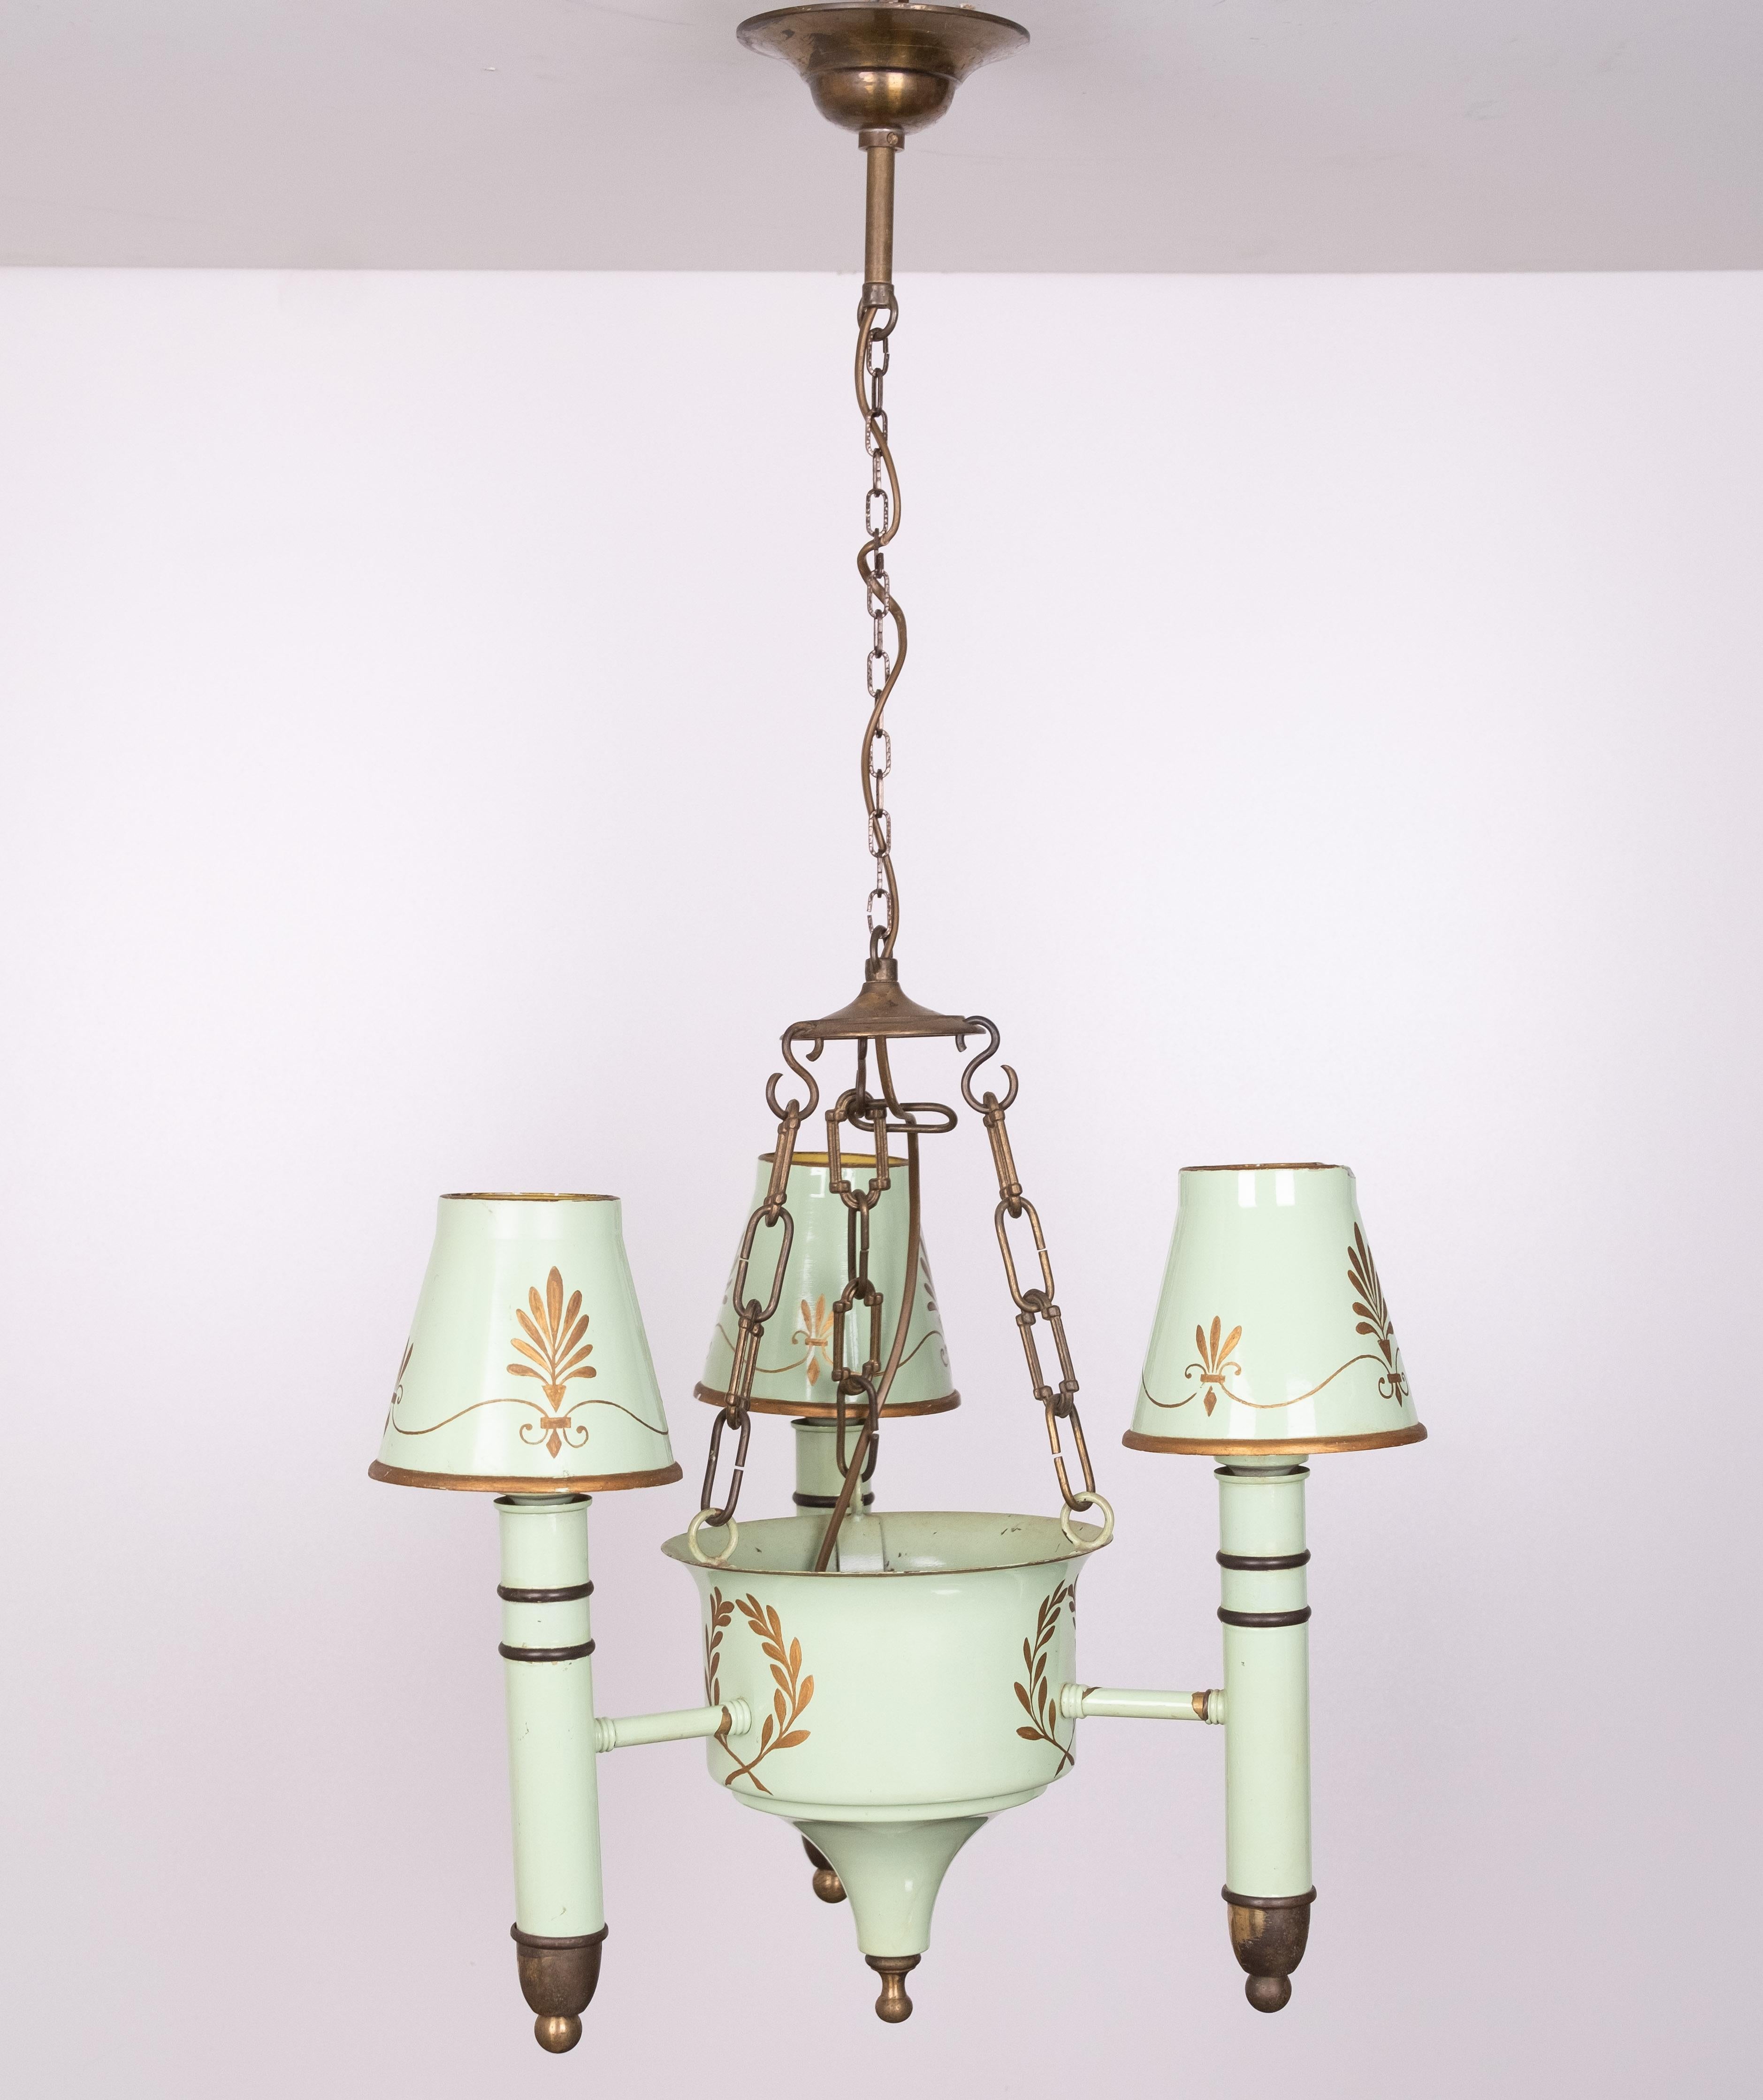 Antique French Empire Directoire green tole paint Four lights chandelier.
Great color and detail with gold plated stencils.
Dating from the middle of the 20th century